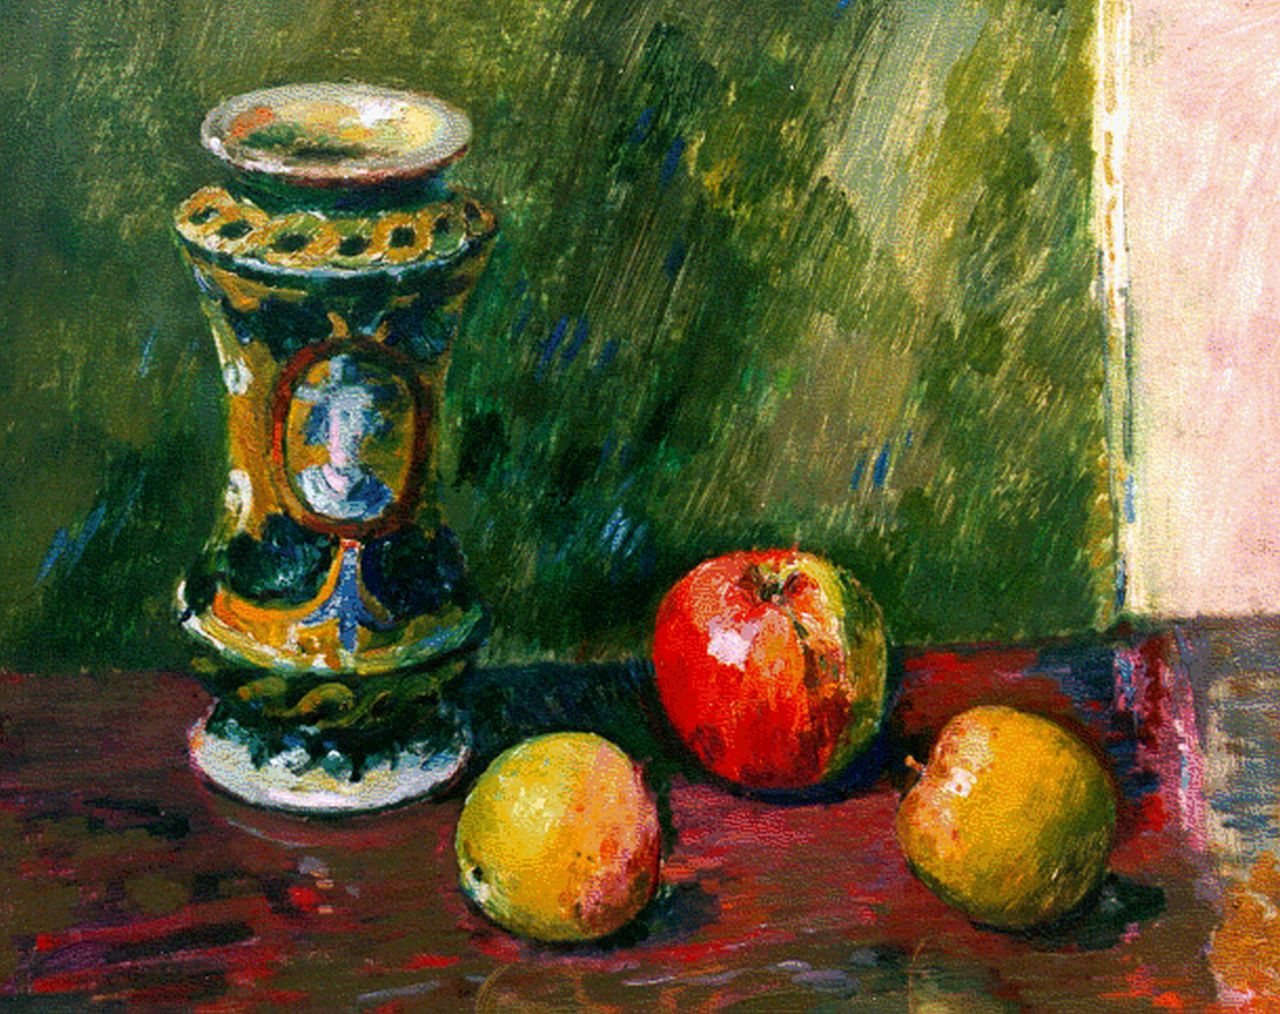 Wiegers J.  | Jan Wiegers, A still life with apples, oil on canvas 40.5 x 50.5 cm, signed m.r.